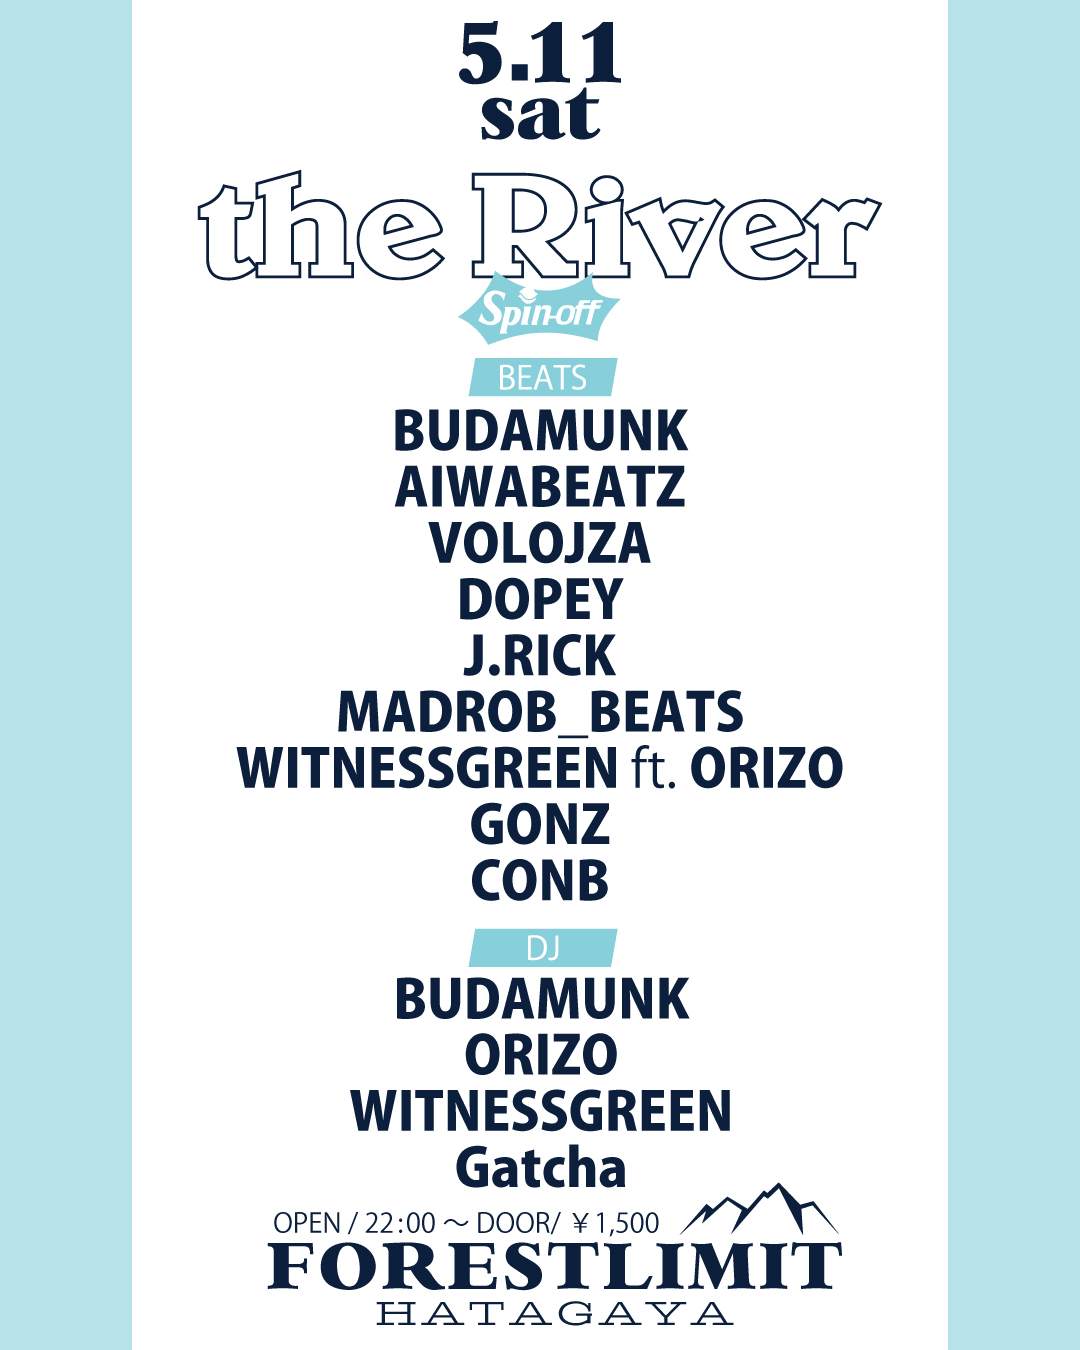 the River (spin-off) - フライヤー表